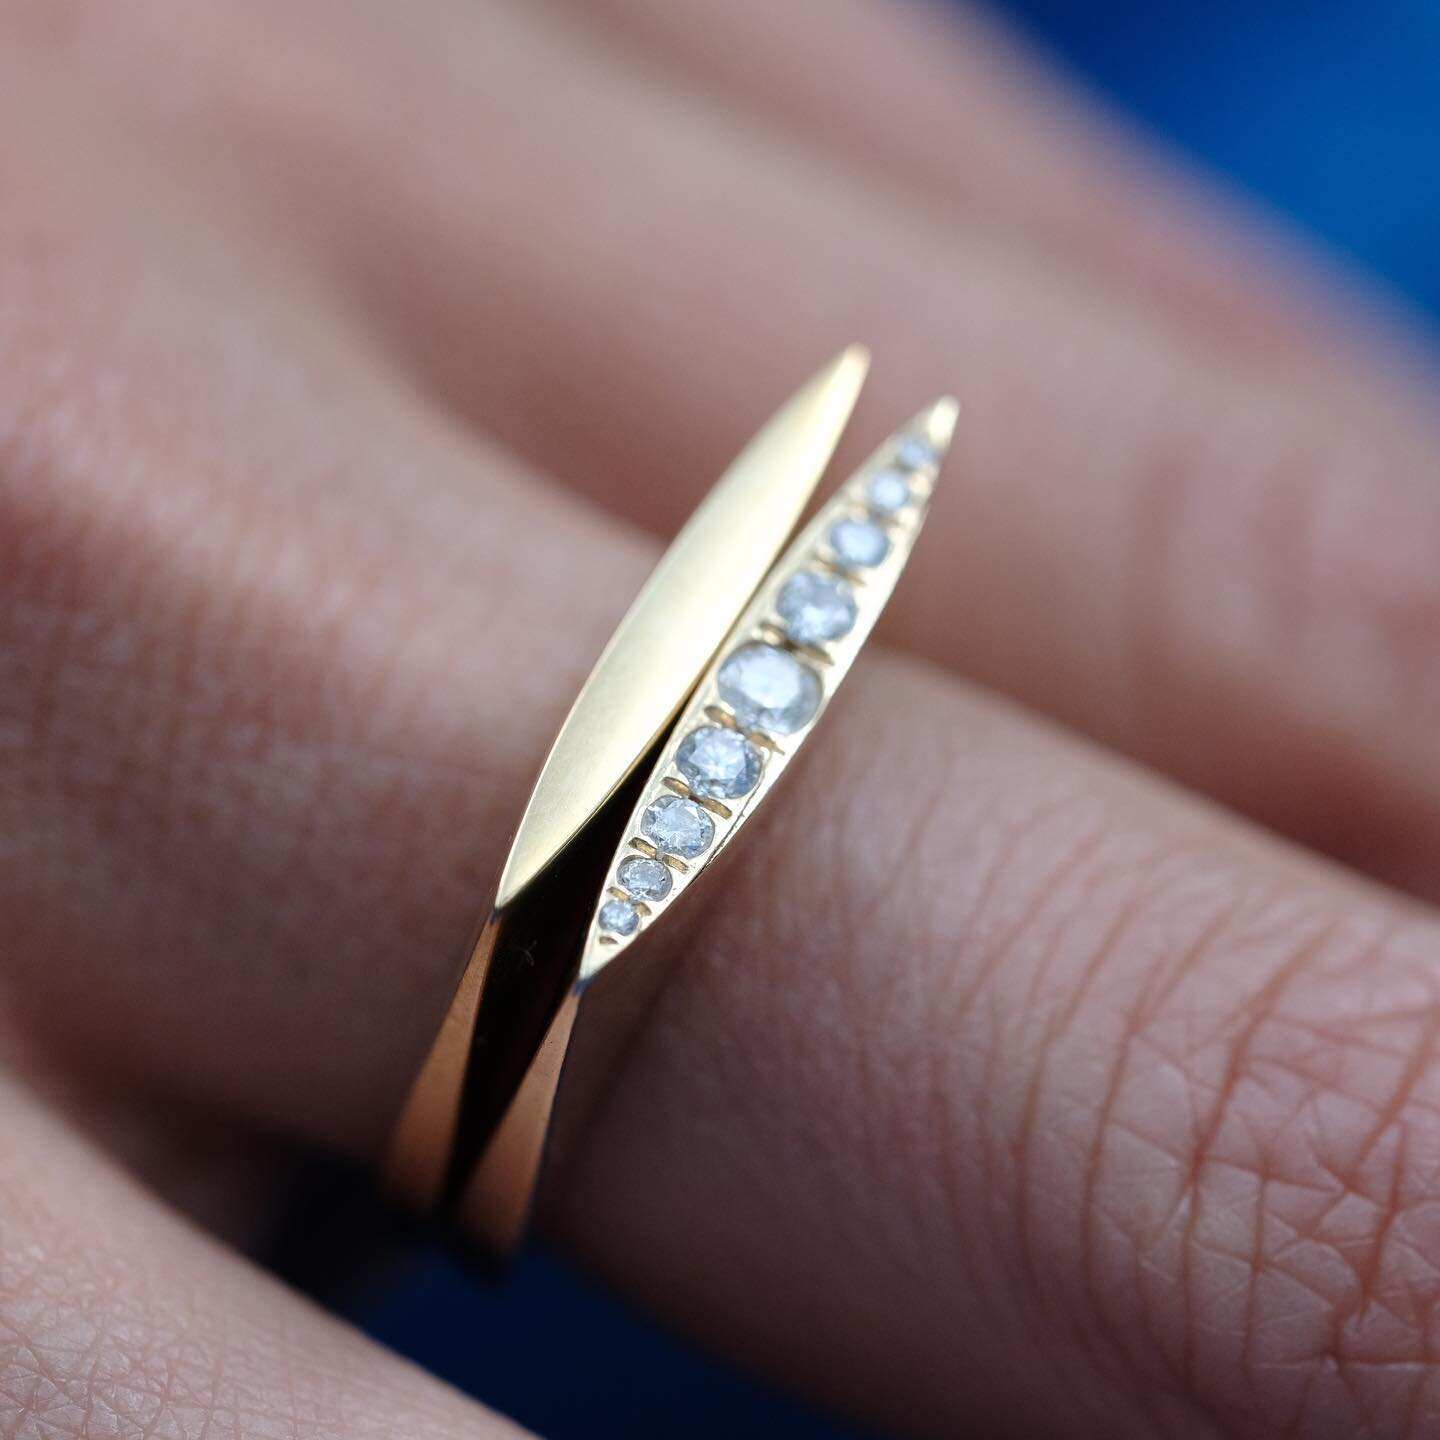 Repetition, precision, rhythm. 

The convex ring plays with light and shadow to create drama, despite the minimal form. They are truly rings to wear forever. 

#showmeyourrings #minimaljewelry